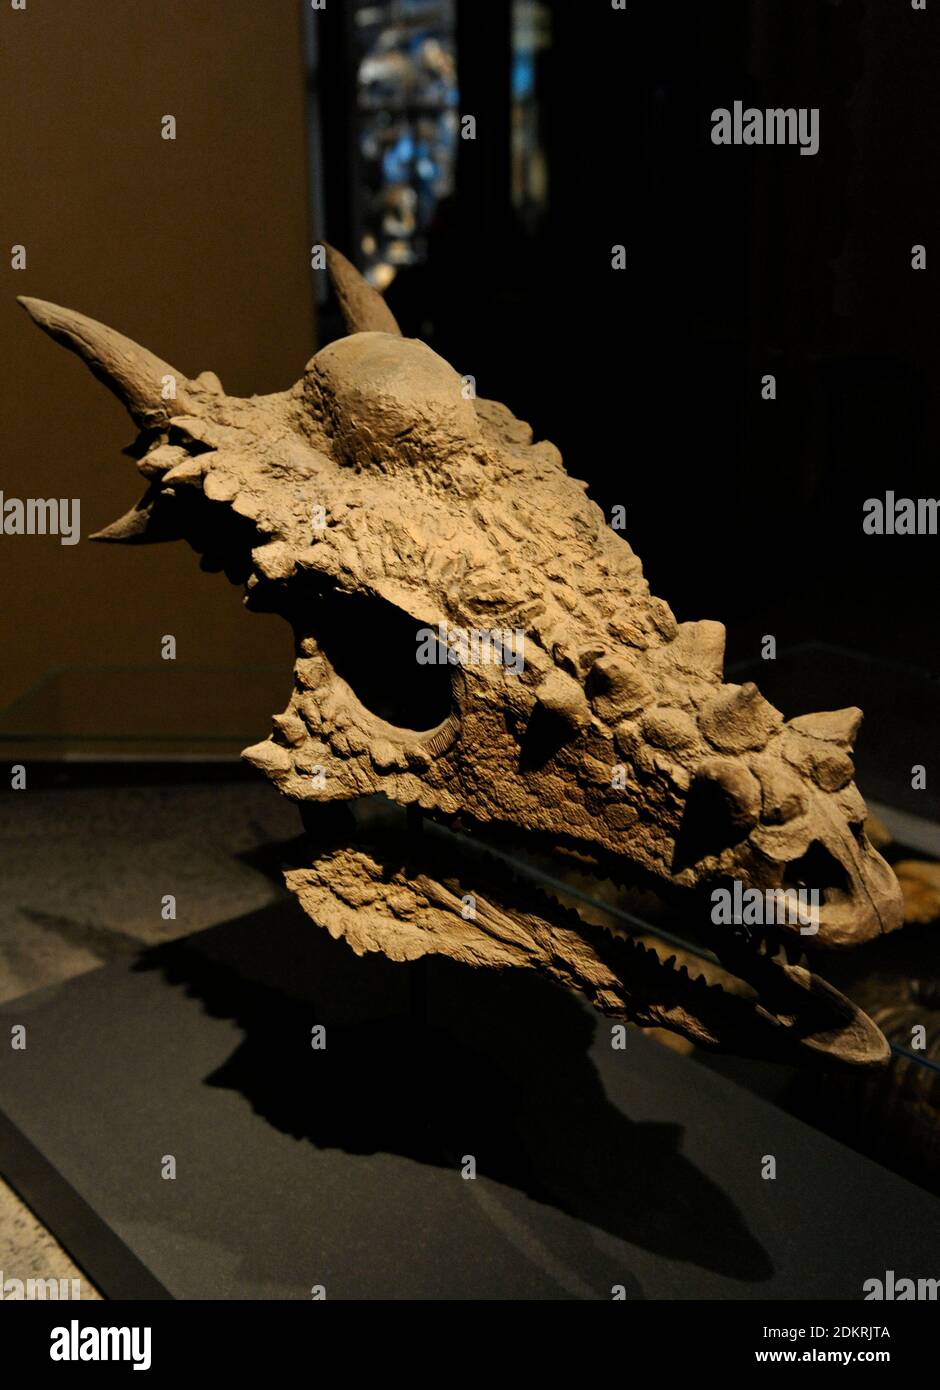 Stygimoloch (it means 'demon from the Styx'). Genus of pachycephalosaurid dinosaur from the end of the Cretaceous period, roughly 66 million years ago. Fossil stygimoloch spinifer skull. North Dakota, United States. Natural History Museum, Berlin, Germany. Stock Photo